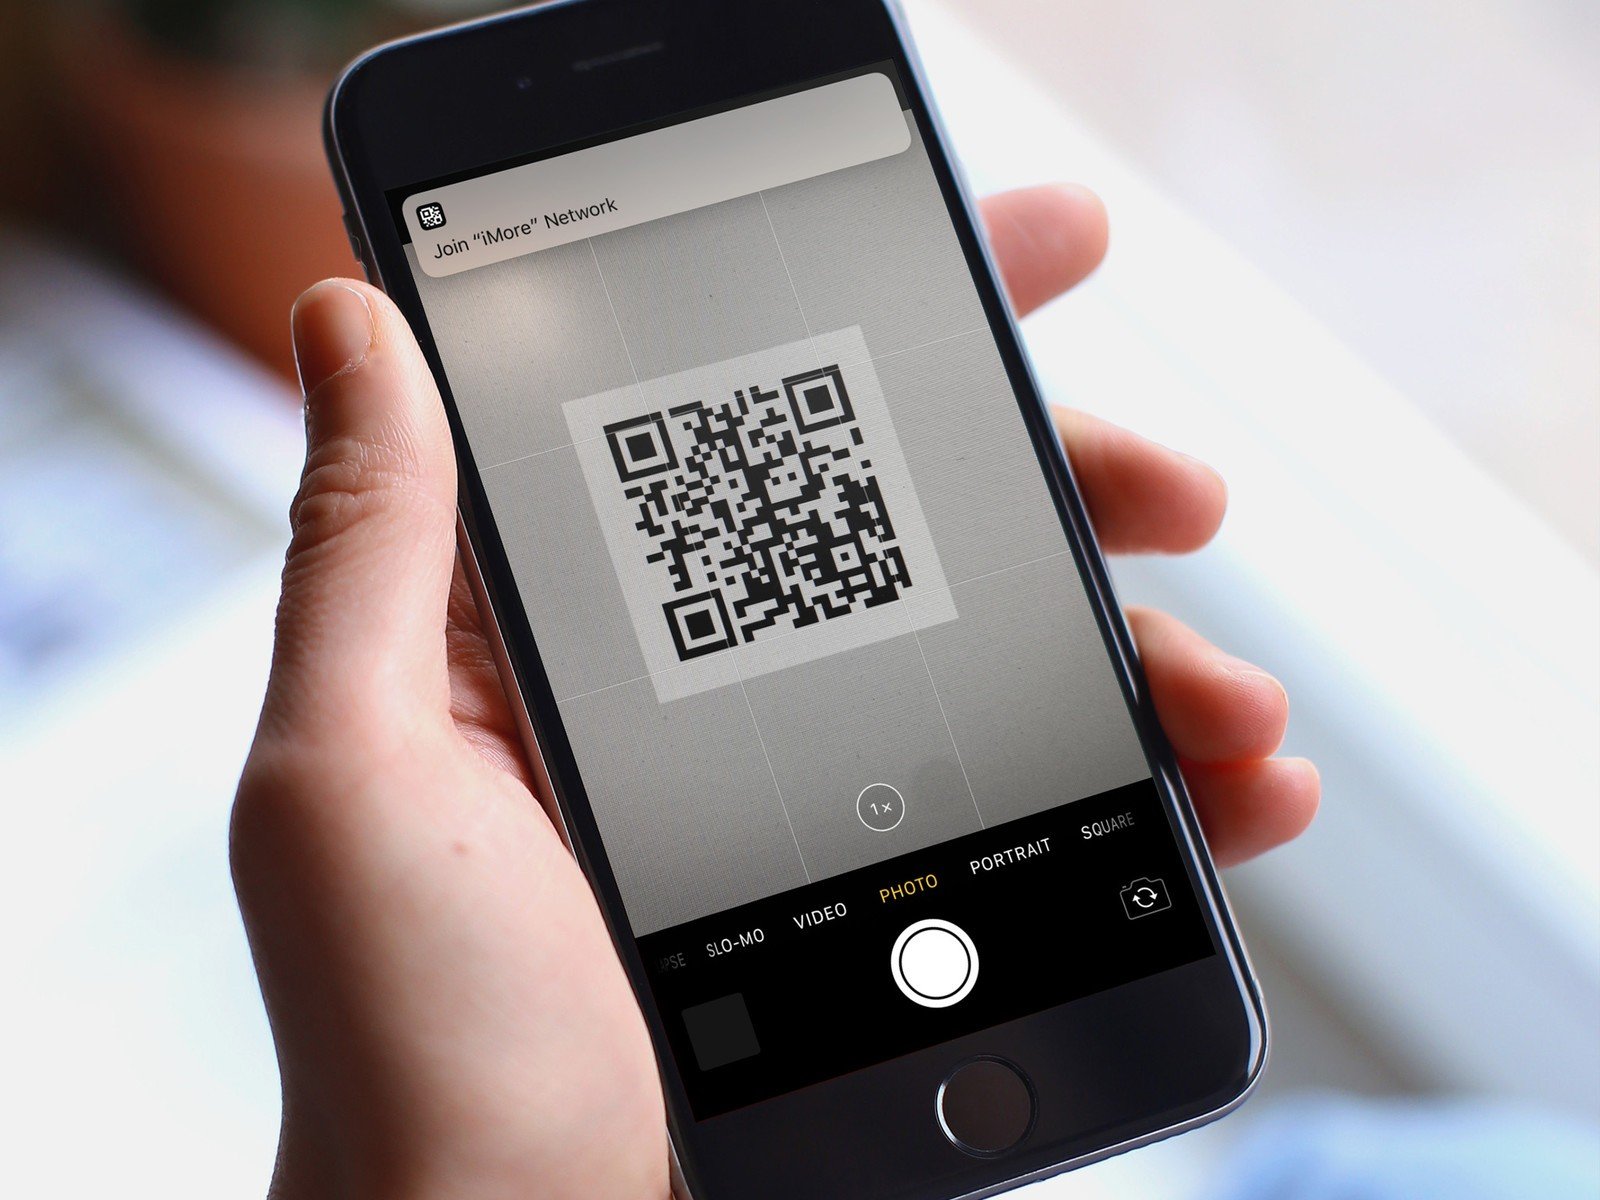 How to use QR codes in iOS 11